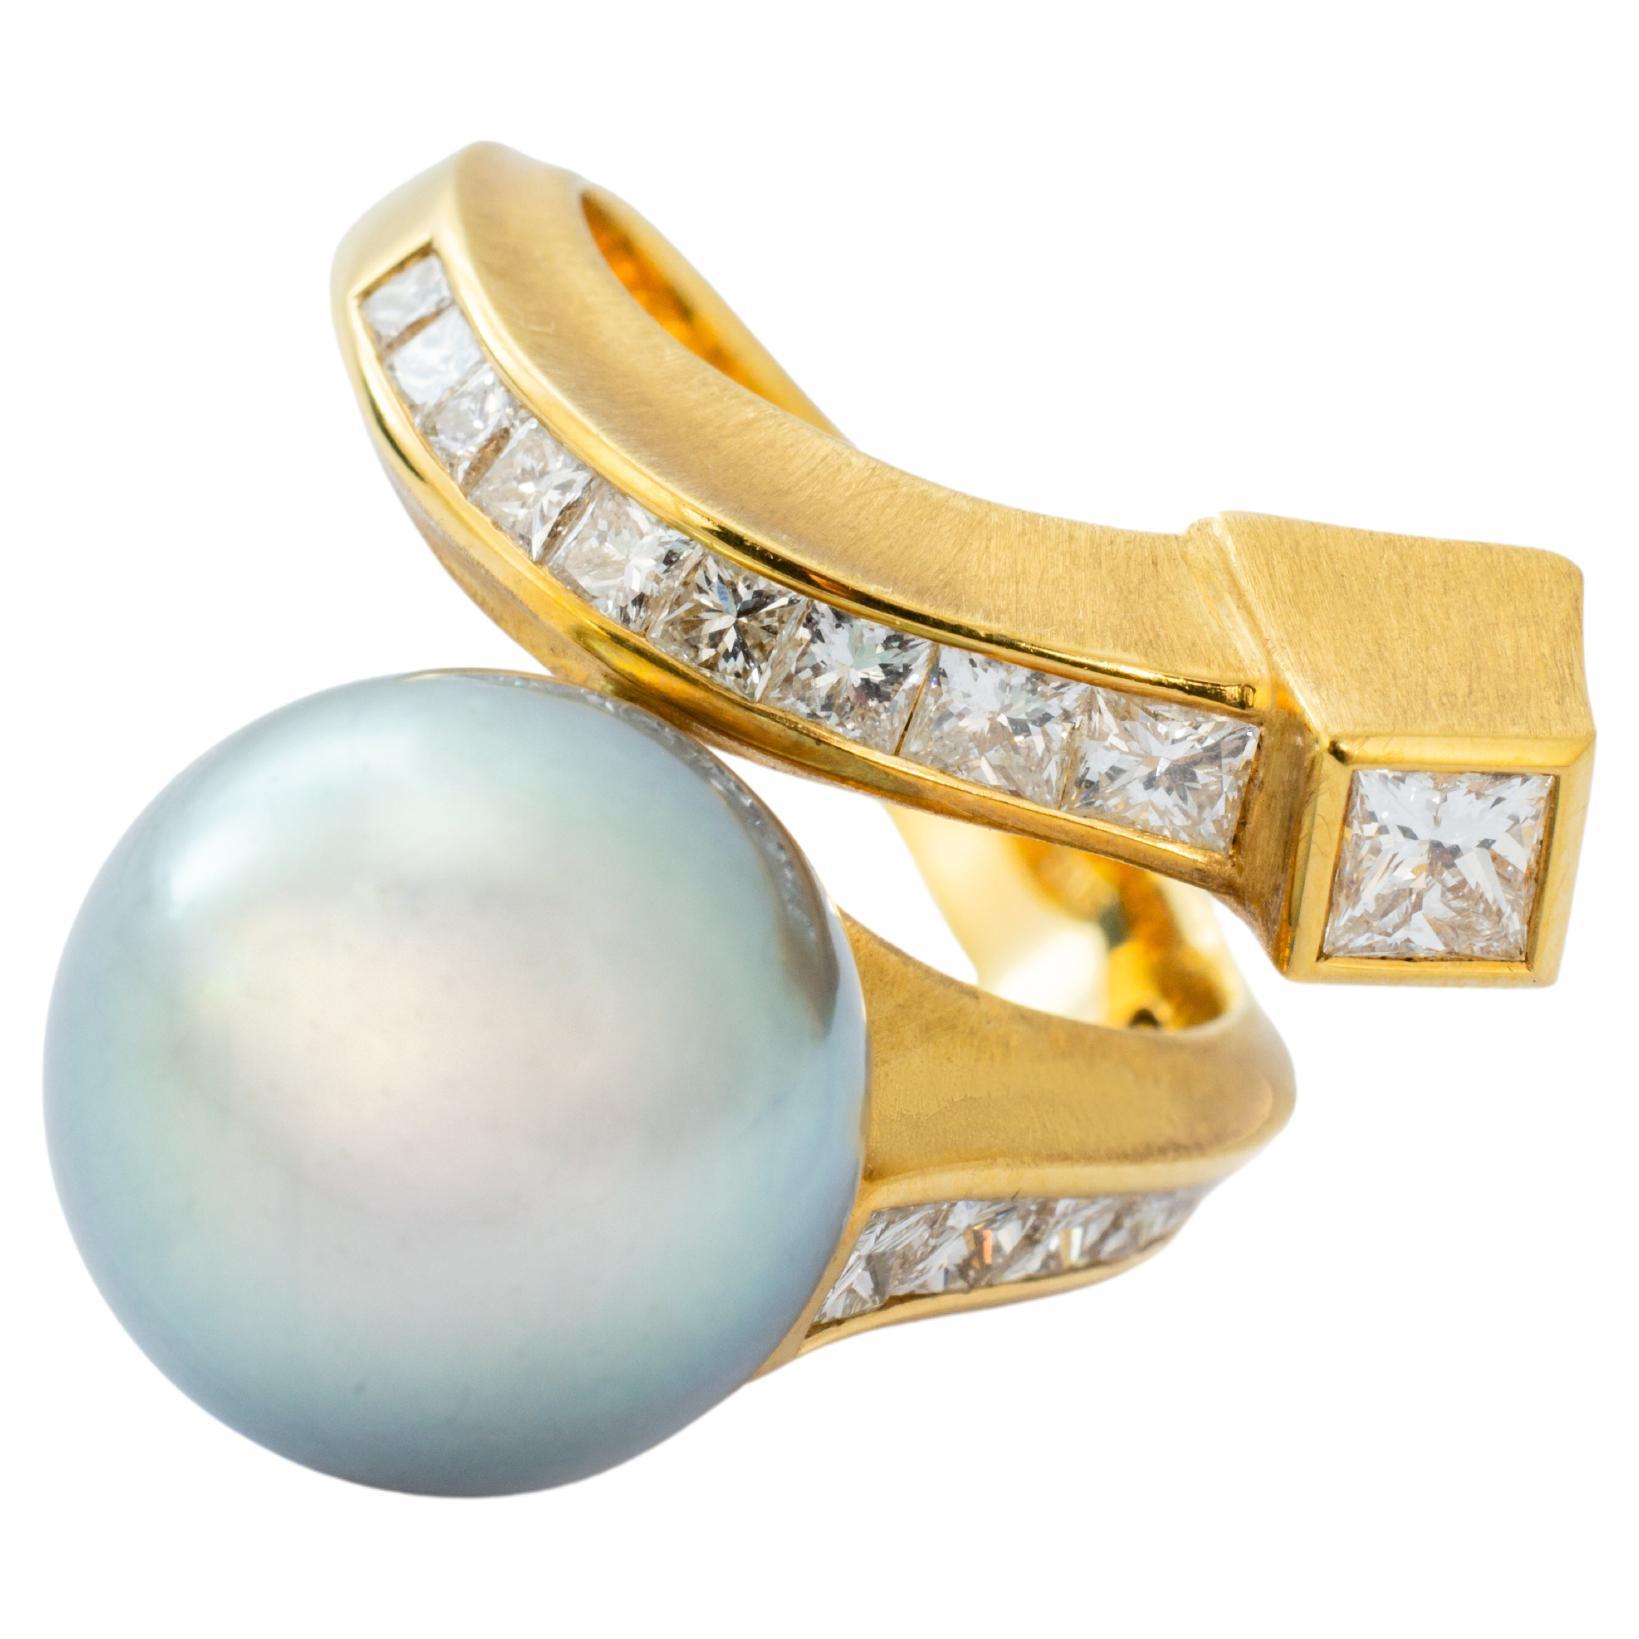 "Costis" Eiffel Ring, 13.60mm Gray South Sea Pearl, and 1.45 cts Diamonds For Sale